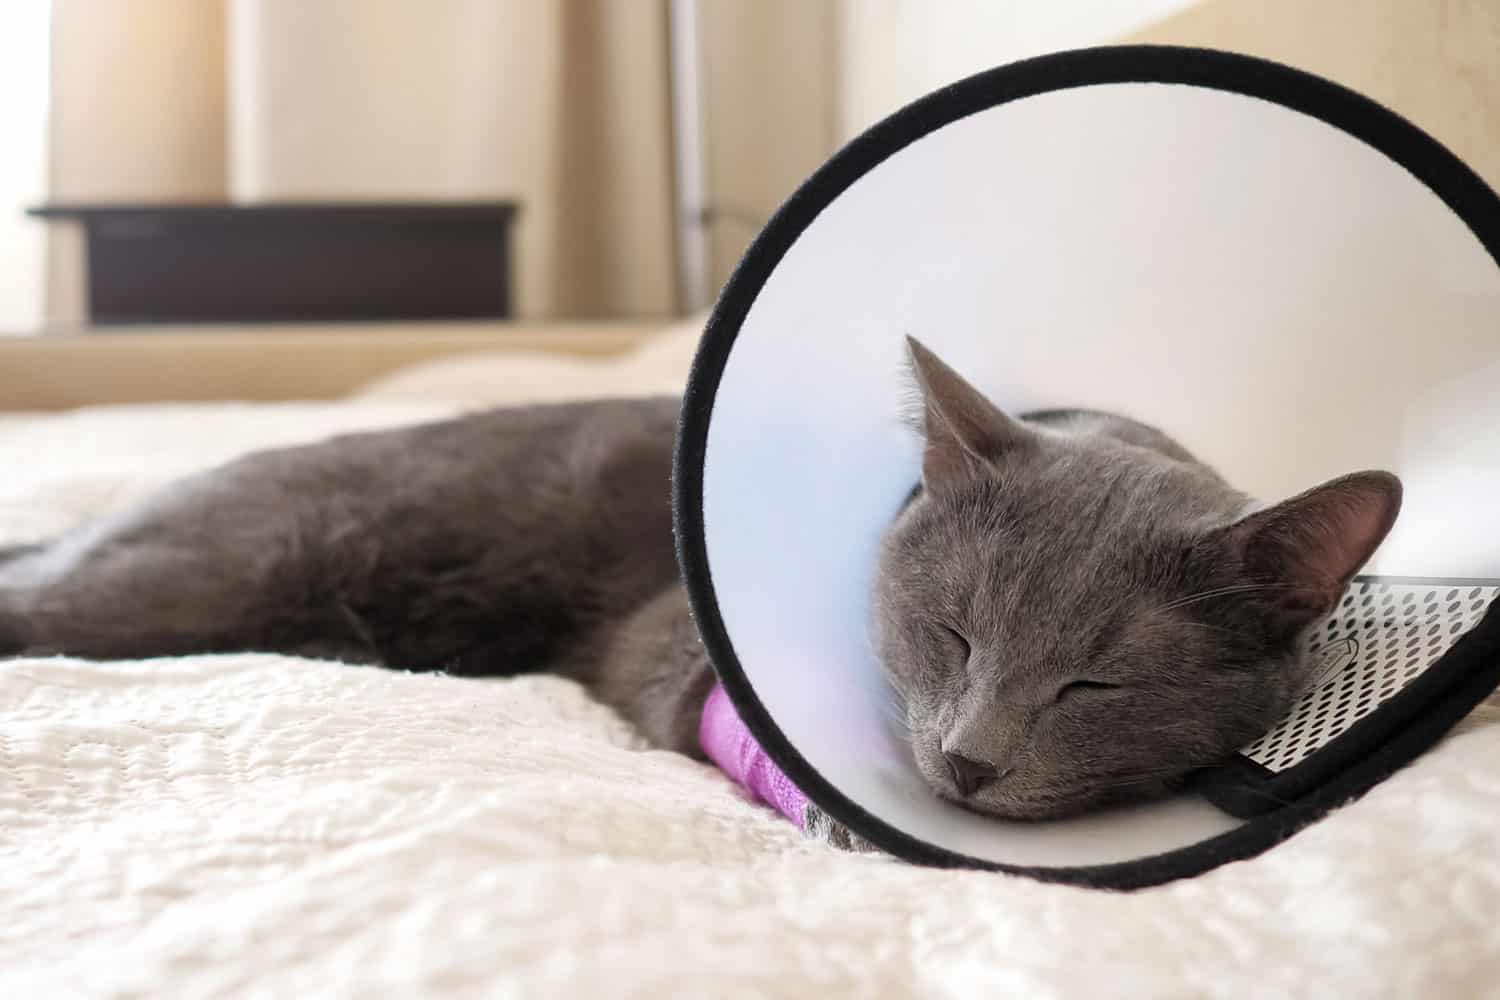 Gray cat in a veterinary collar sleeps on a bed.
